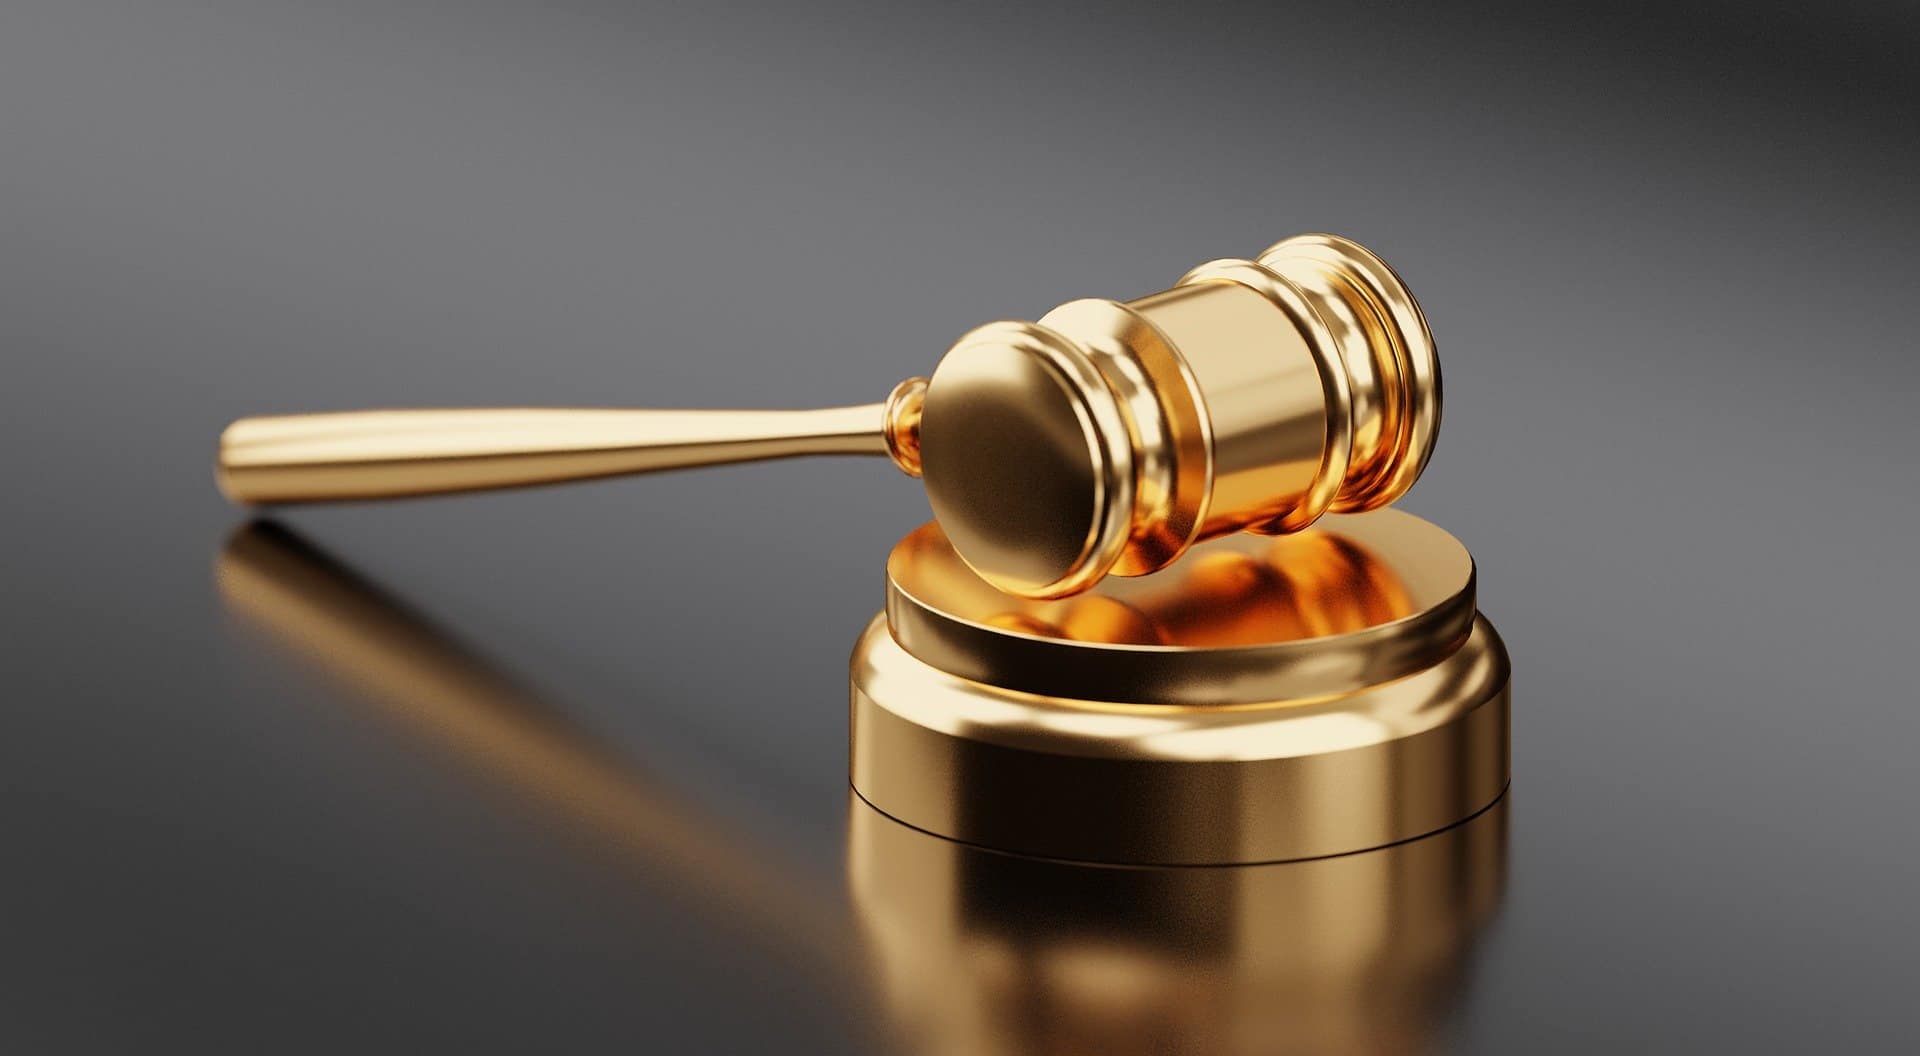 Which States Have Legalized Recreational Cannabis? Gold judge's mallet.